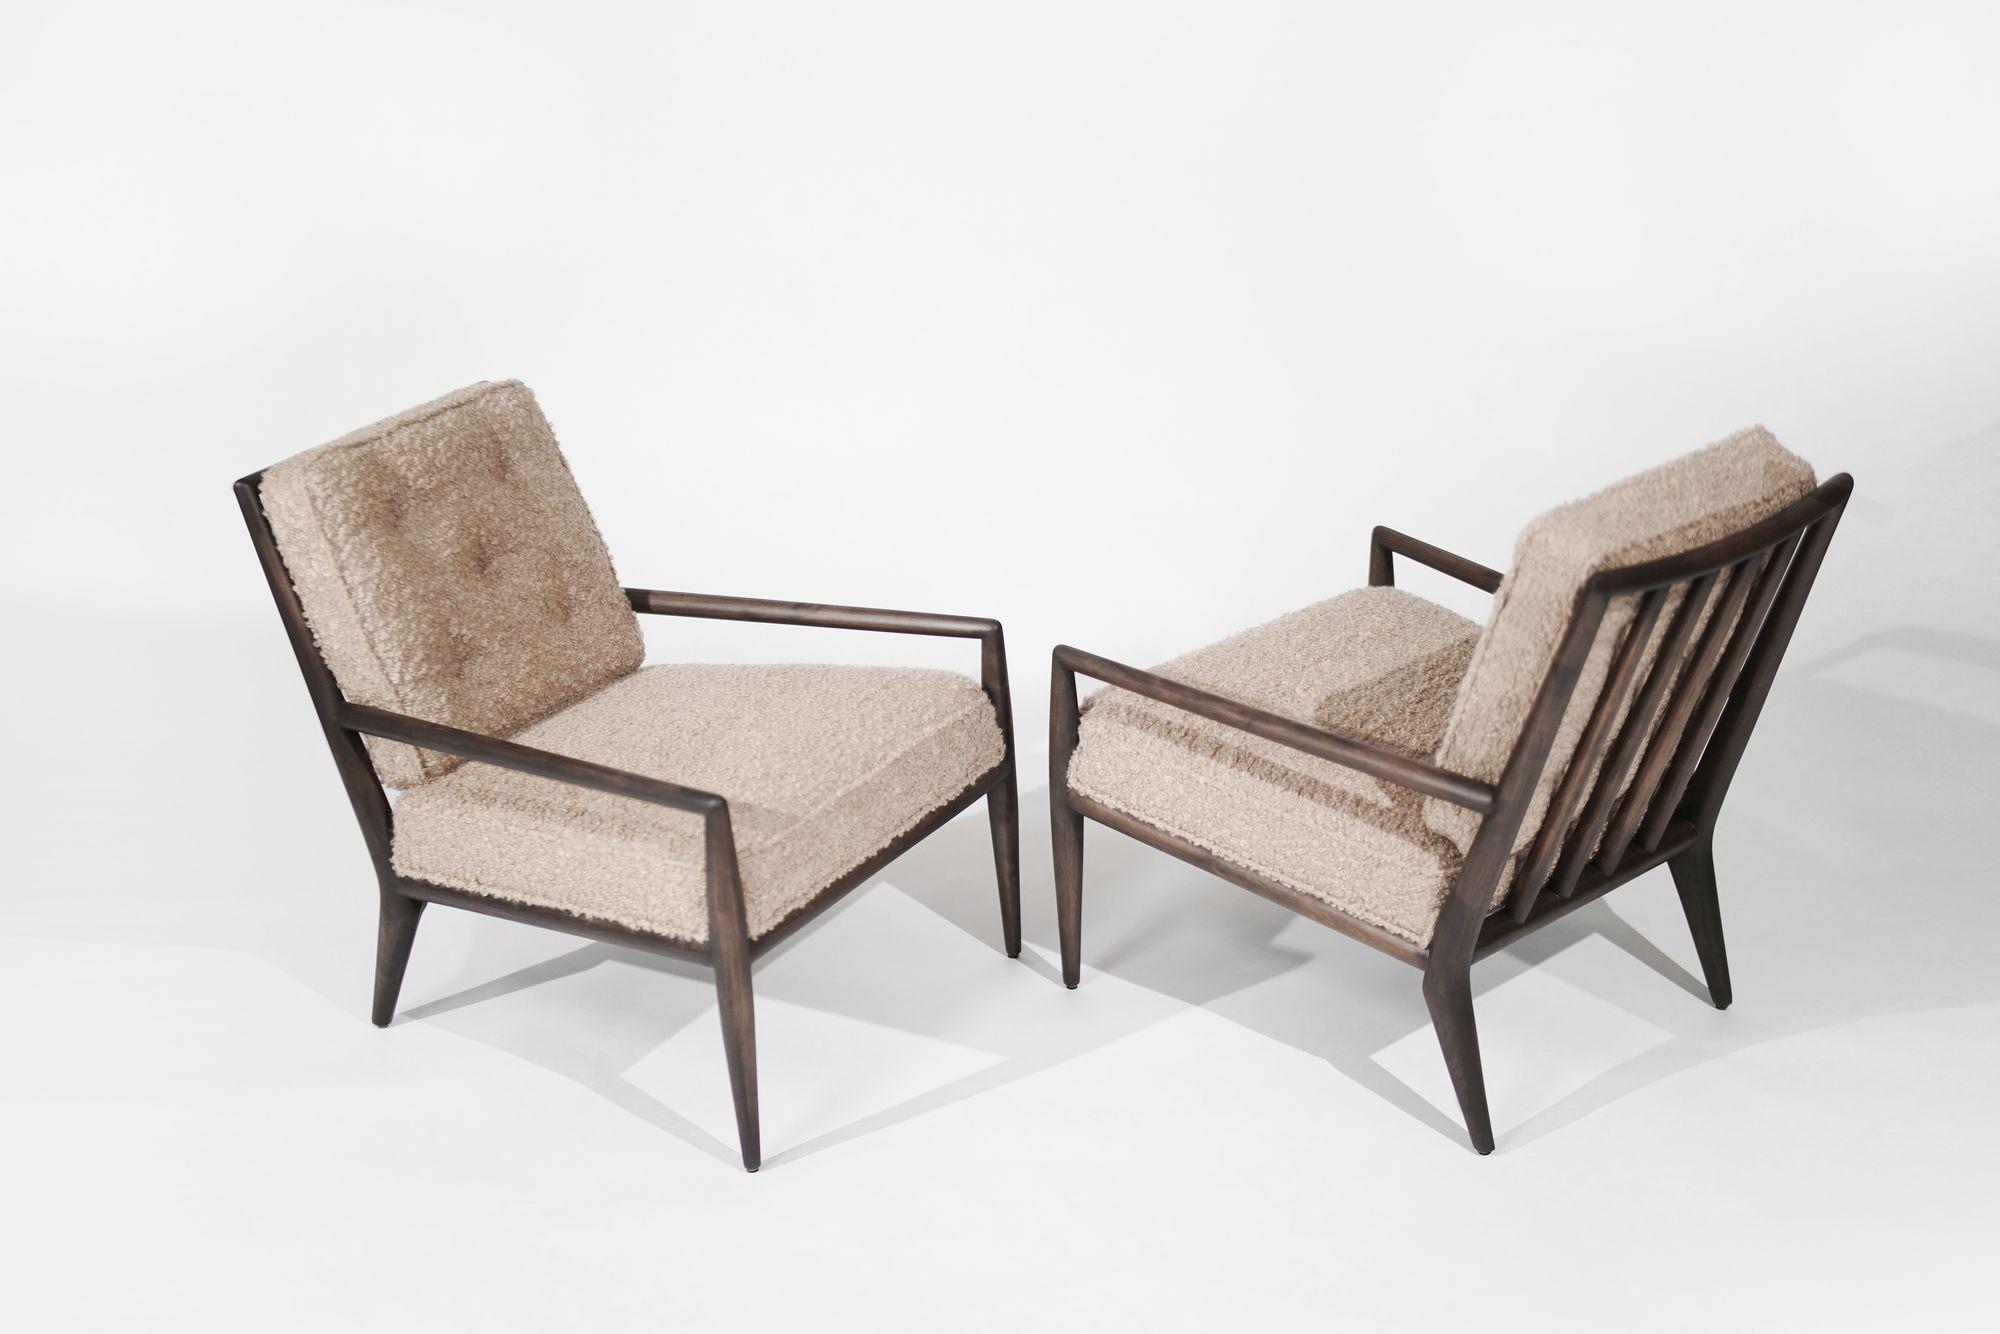 American Set of Lounge Chairs in Teddy Boucle by T.H. Robsjohn-Gibbings, C. 1950s For Sale